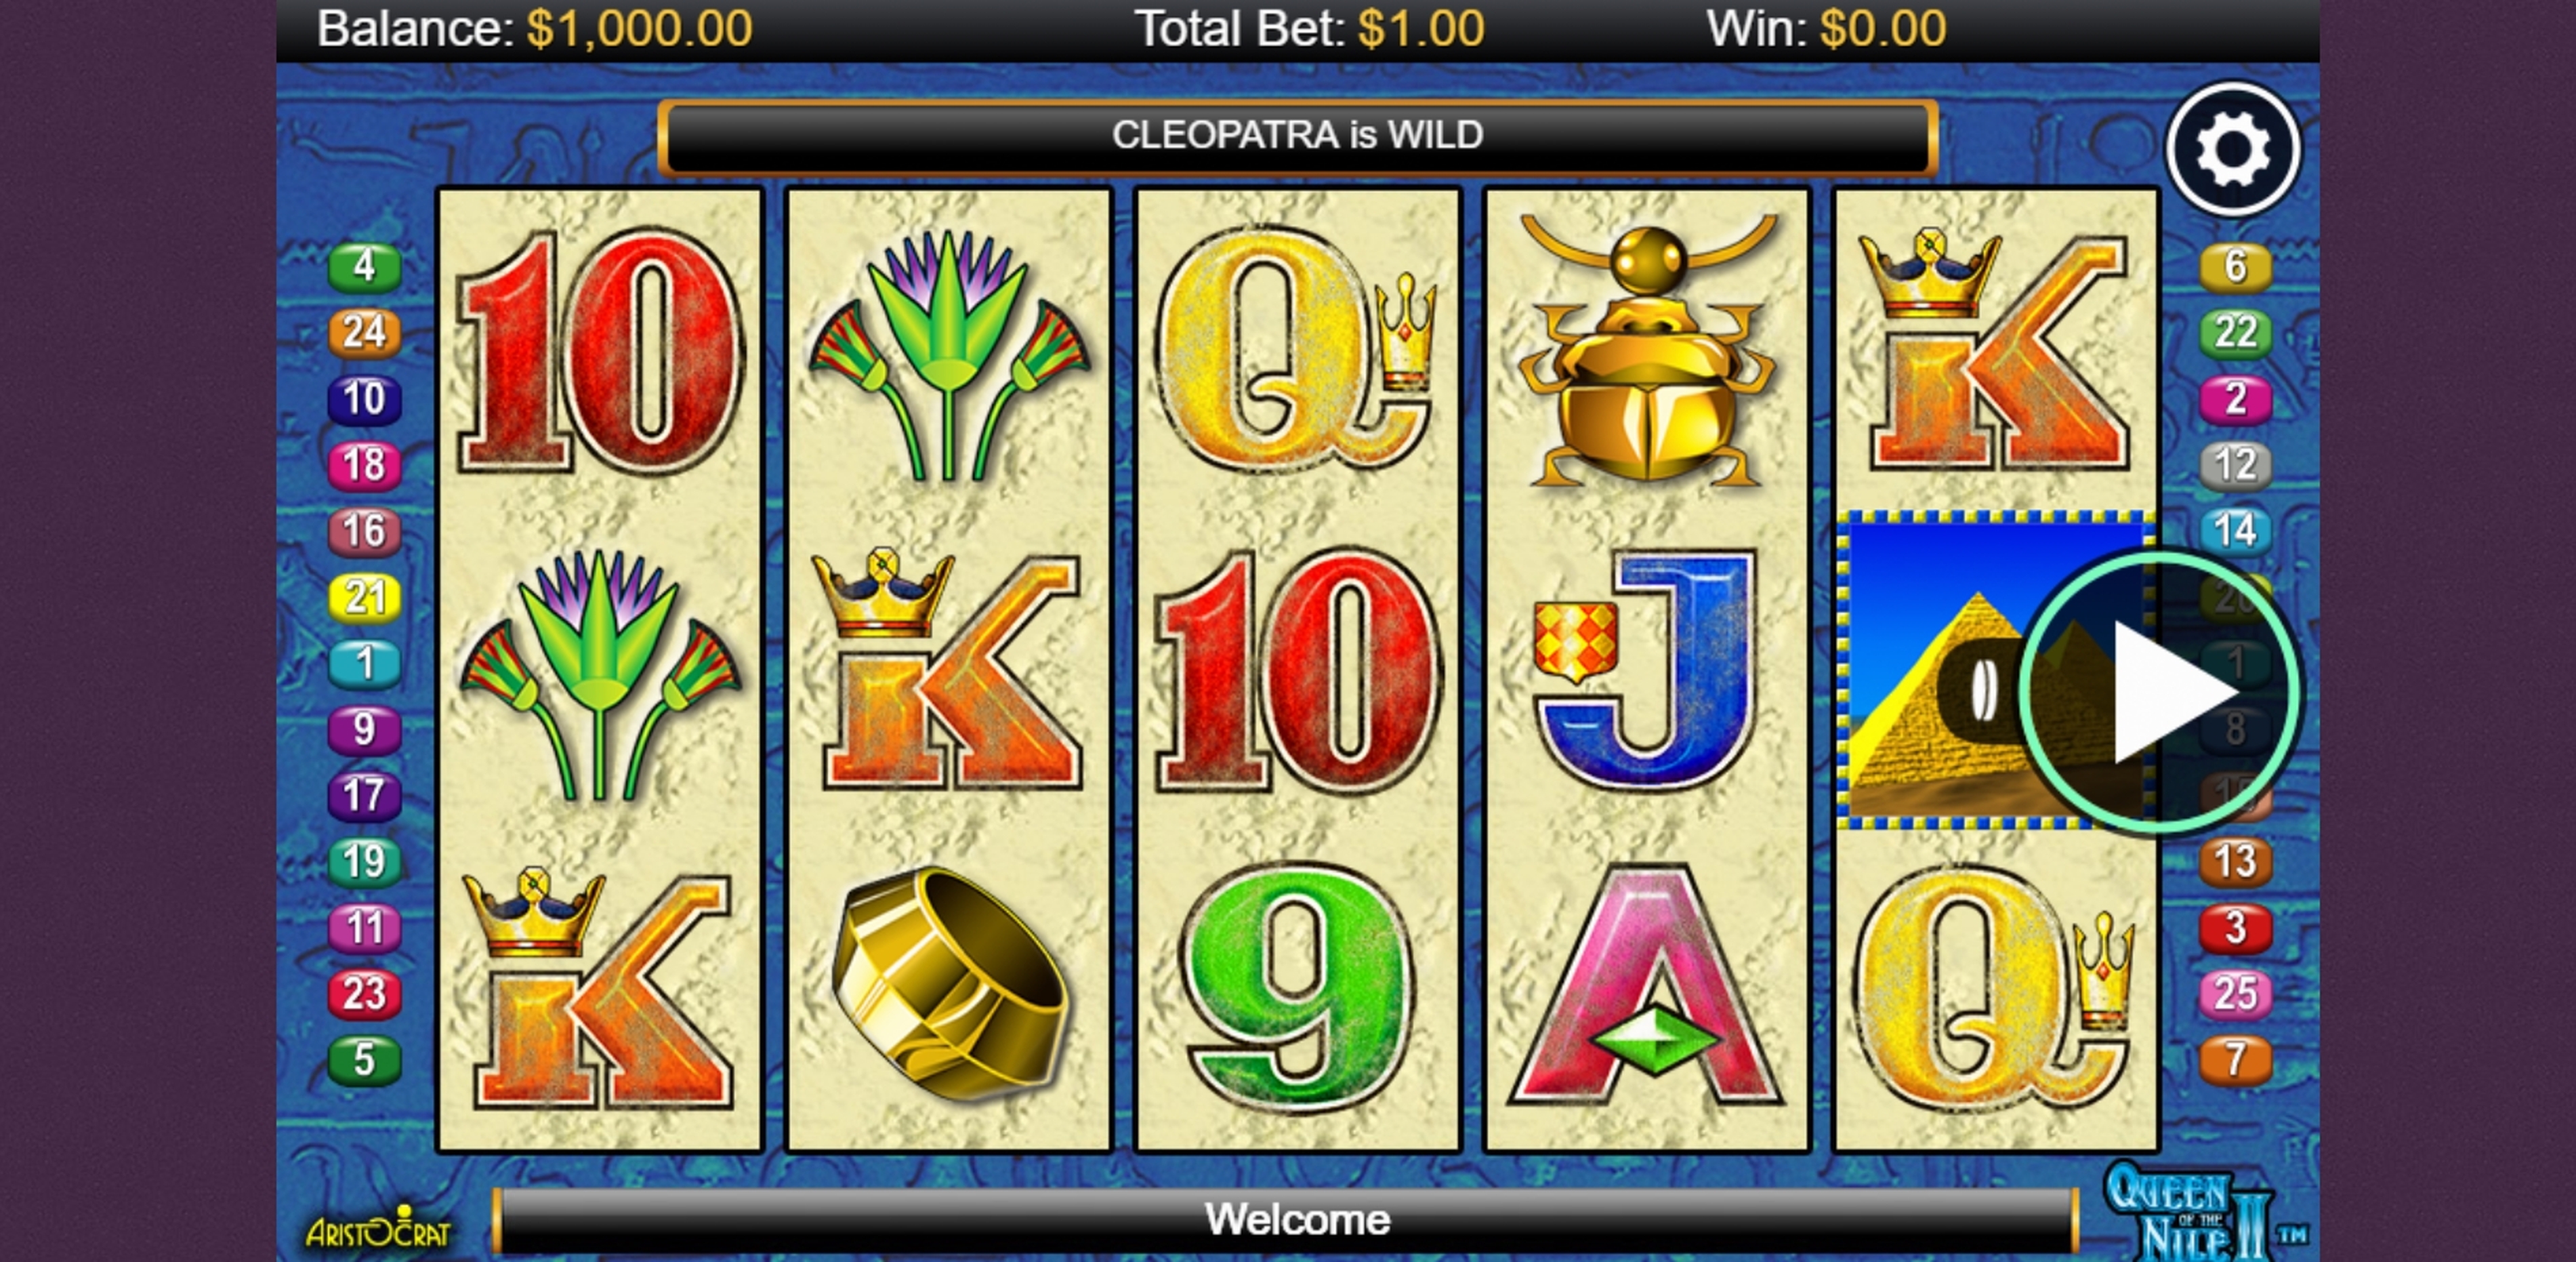 Reels in Queen of the Nile 2 Slot Game by Aristocrat